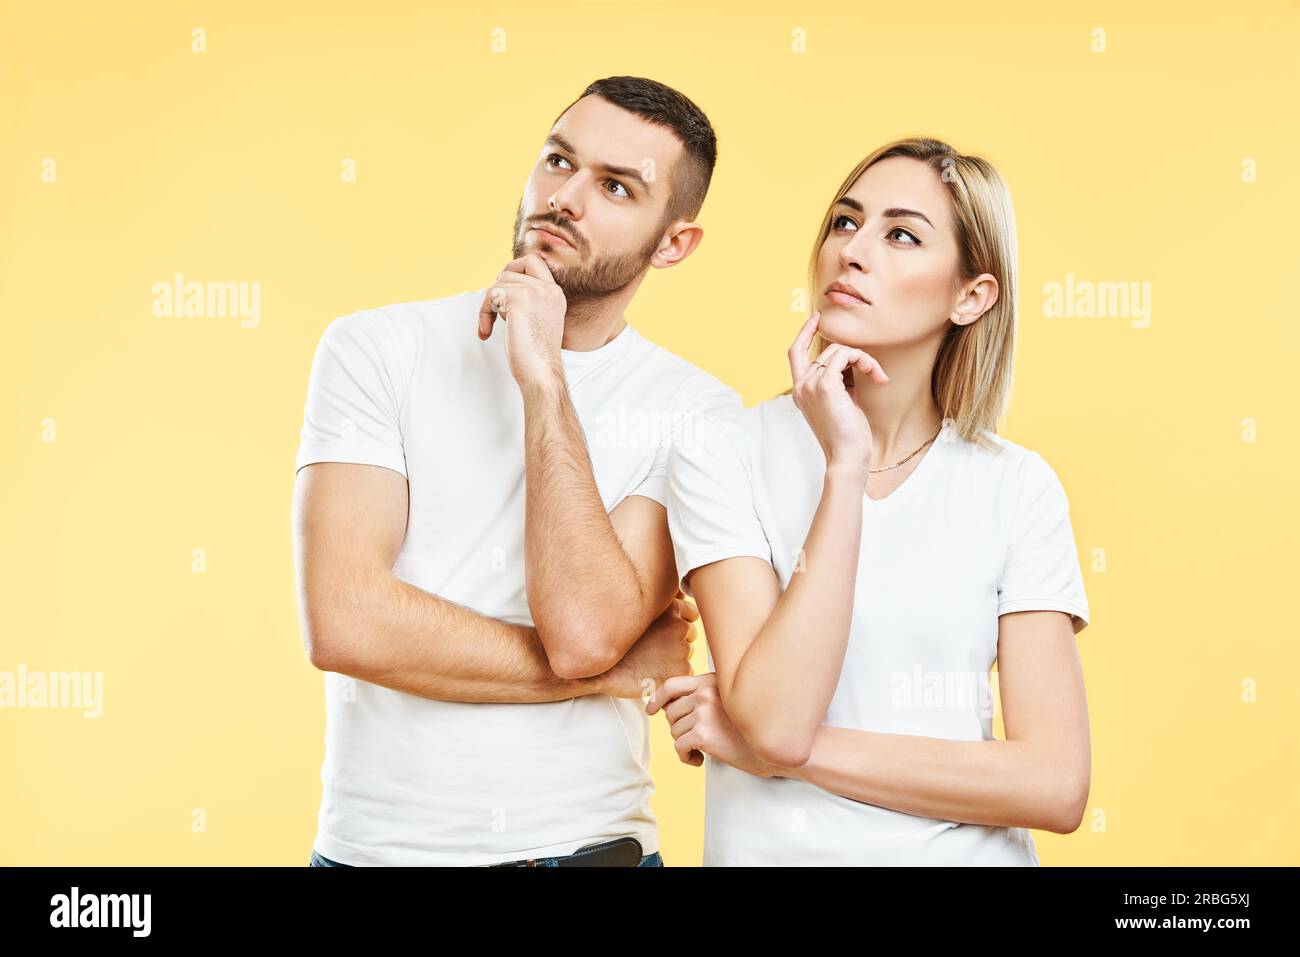 Young thoughtful man and woman looking sideways isolated on yellow background. doubt concept Stock Photo